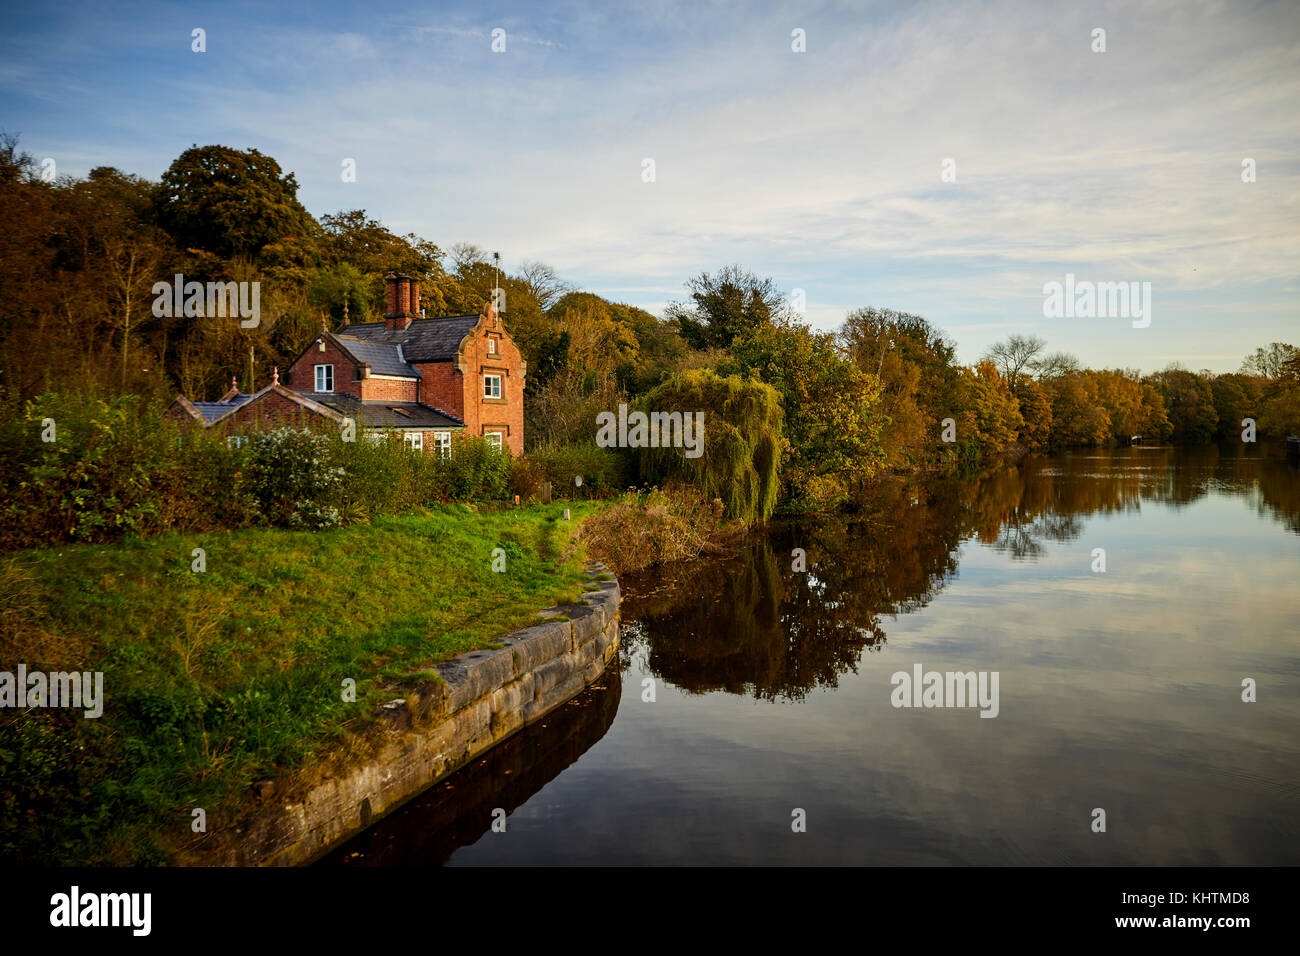 A Autumn landscape featuring a large brick house on the banks of the River Weaver in Northwich, Cheshire. Stock Photo